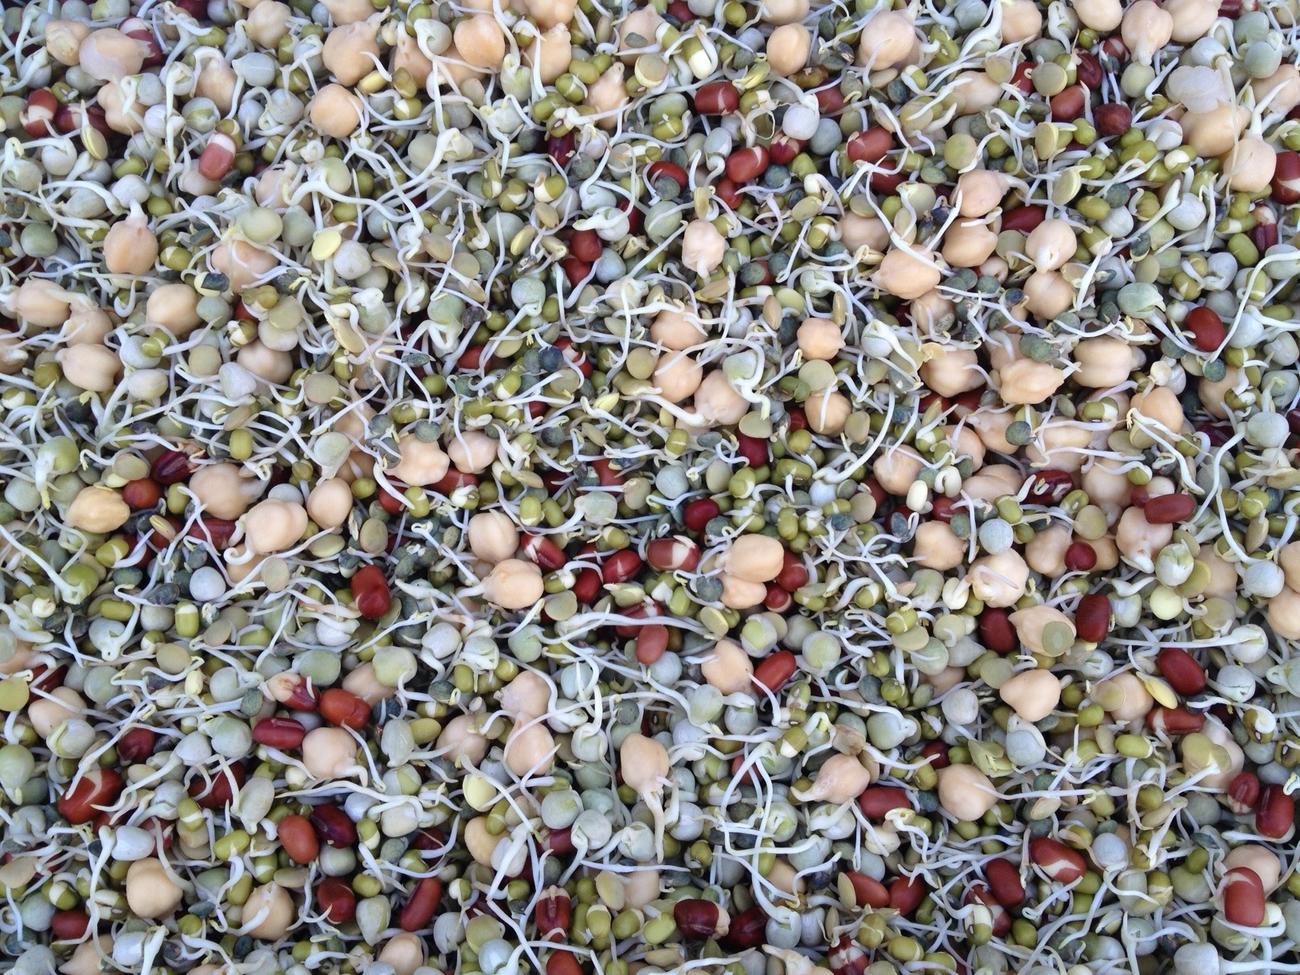 Farmers’ market find: sprouted beans and lentils